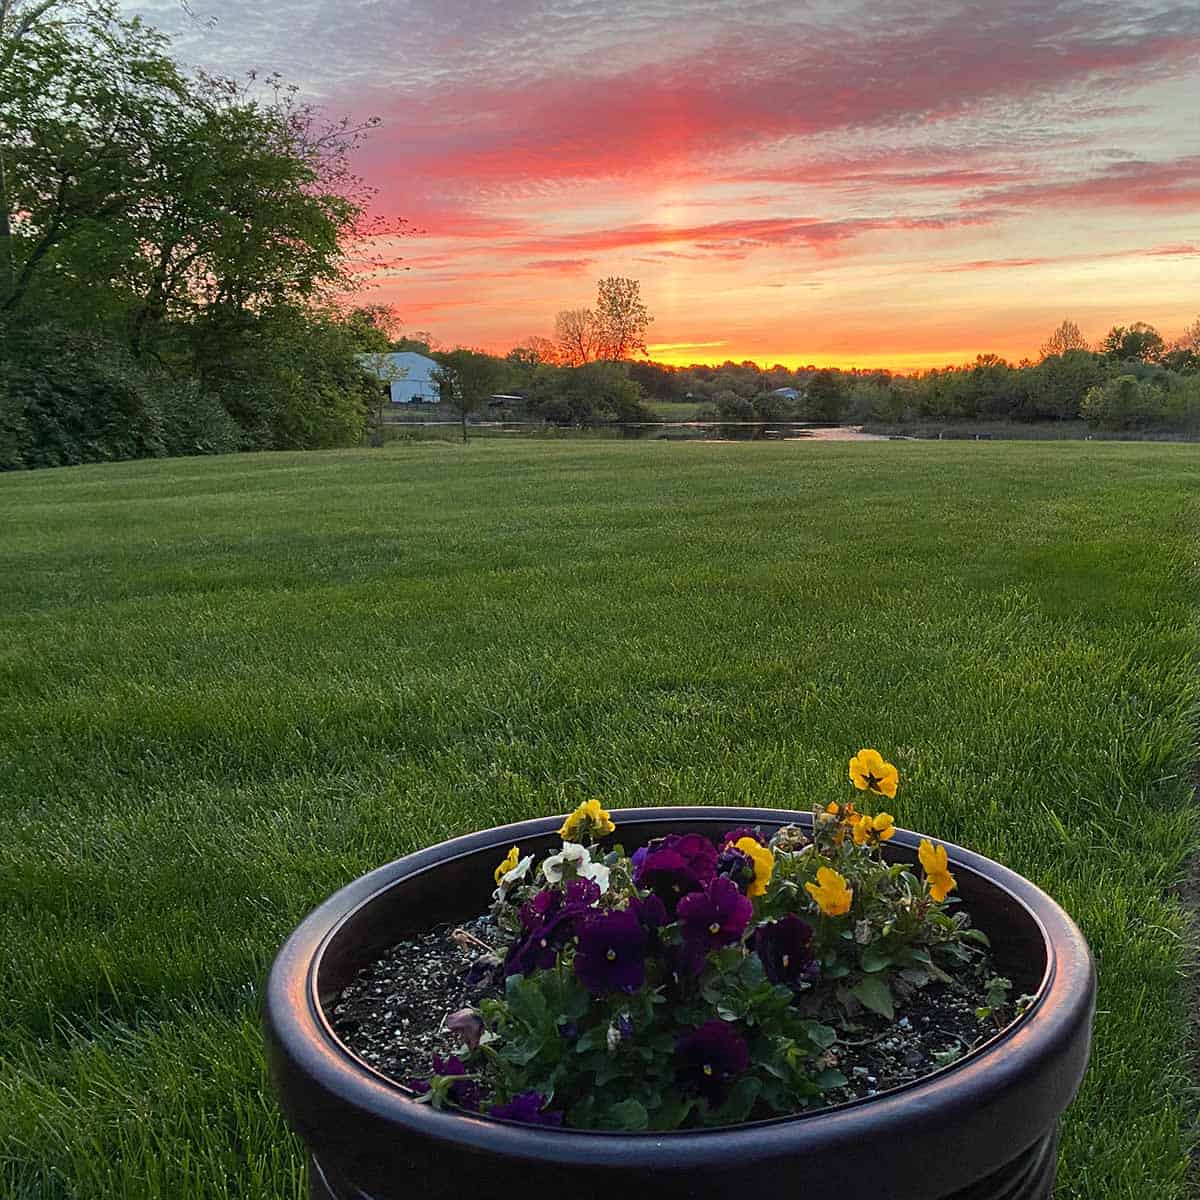 Pot of flowers on porch and yard in background with sunset